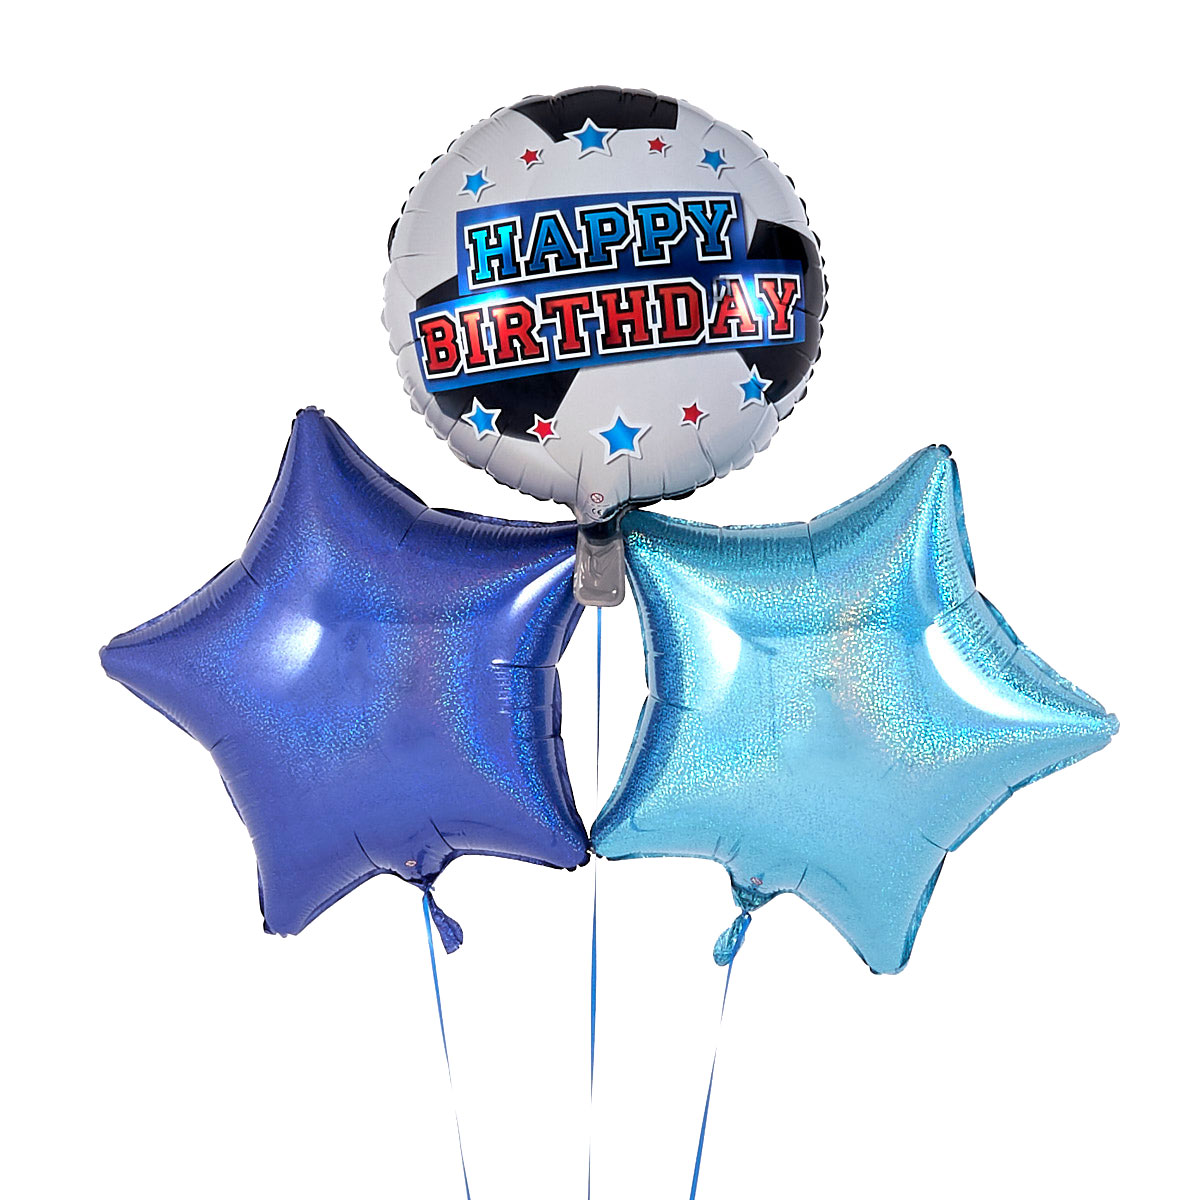 Happy Birthday Football Blue Balloon Bouquet - DELIVERED INFLATED!